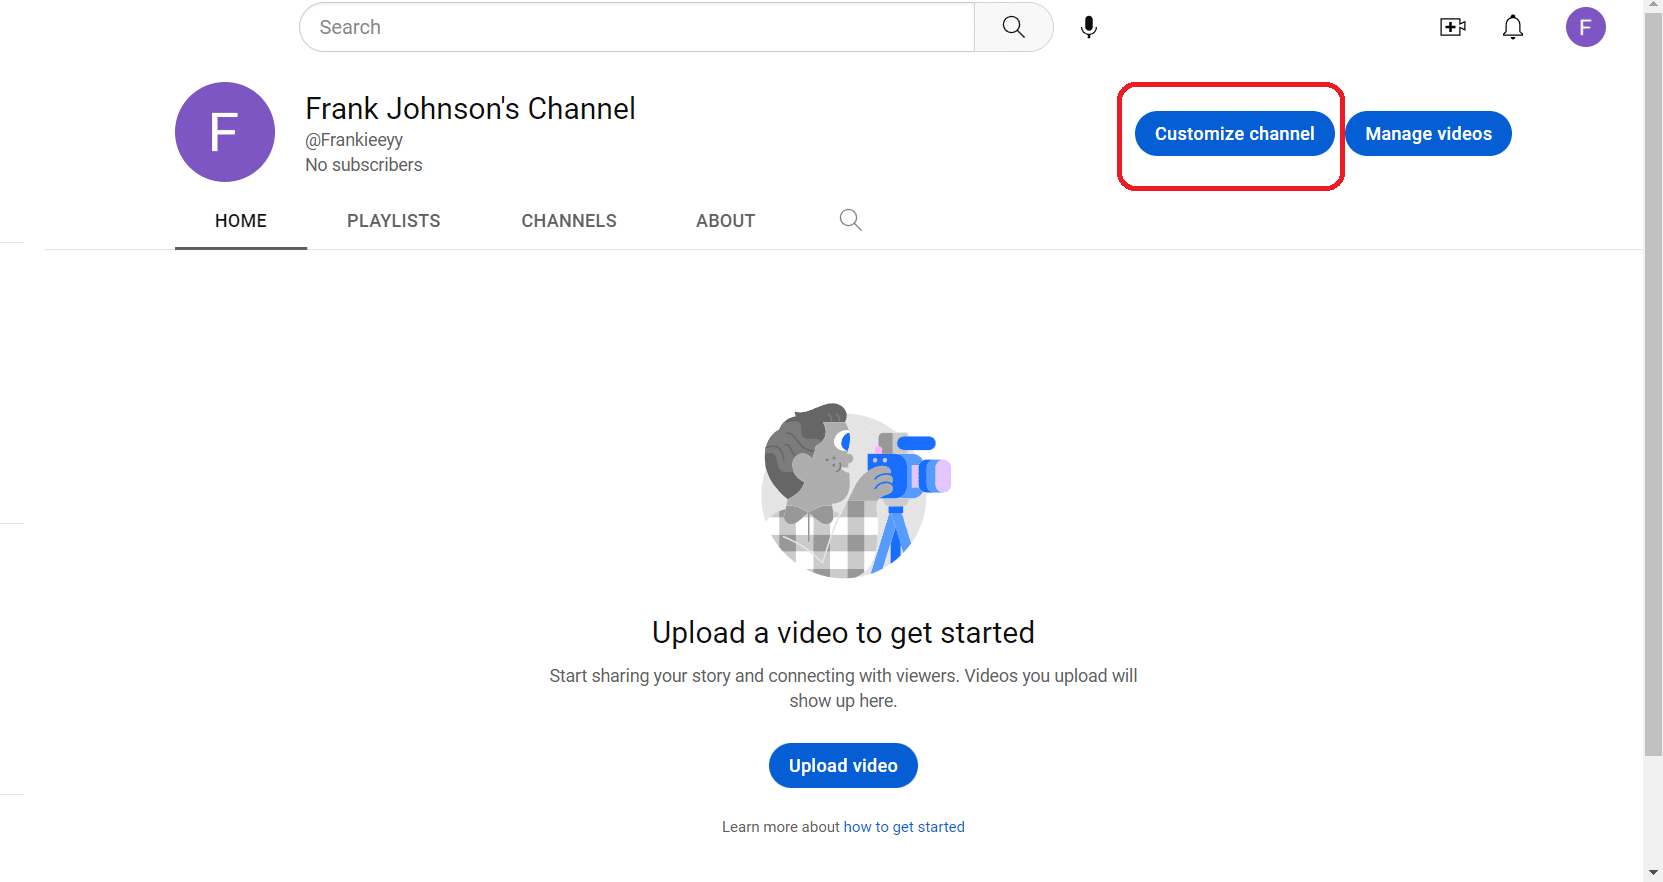 Click on "Customize channel" next to "Manage videos".